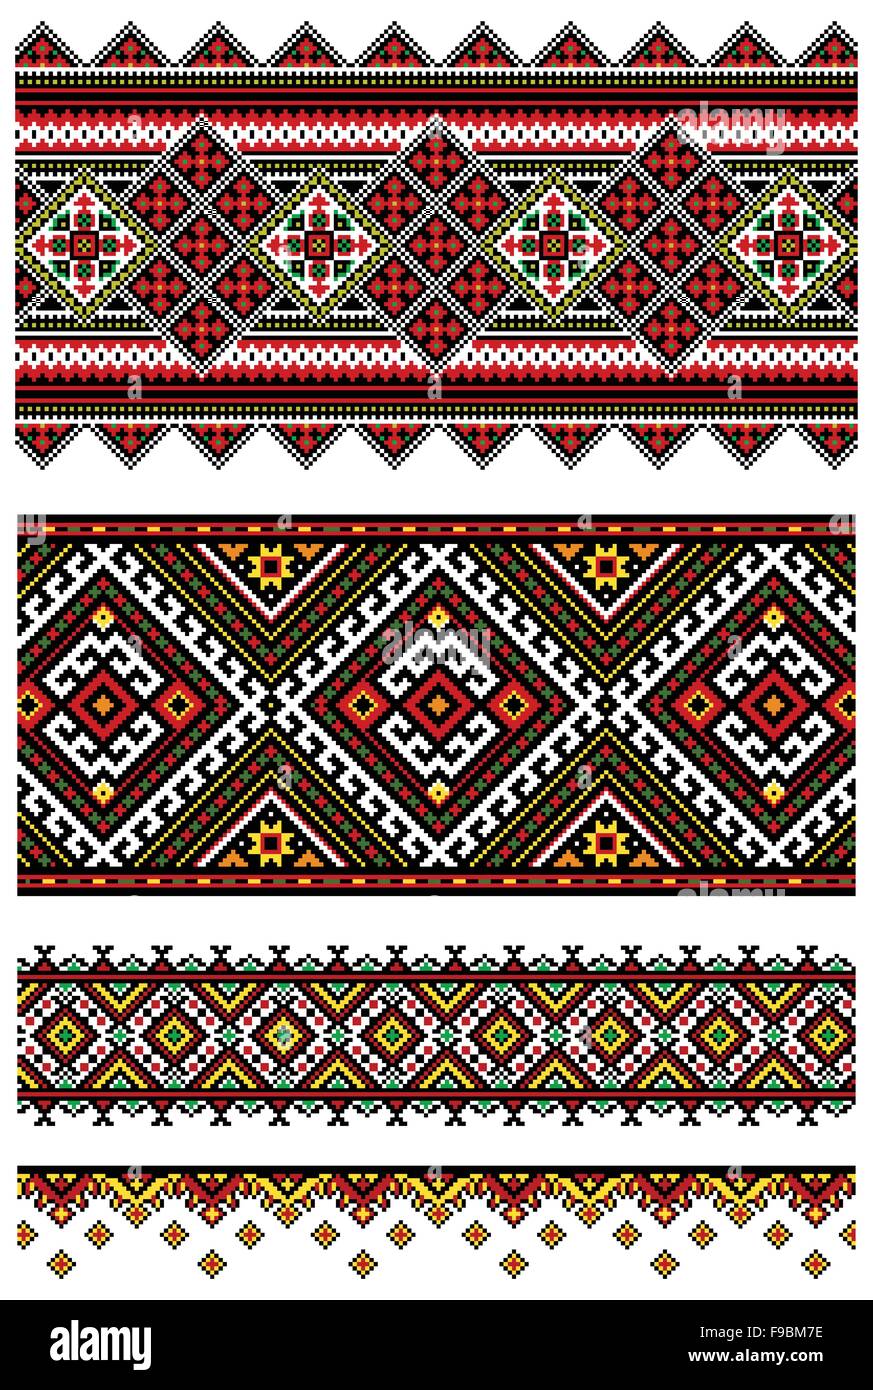 Vector illustrations of ukrainian embroidery ornaments, patterns, frames and borders. Stock Vector